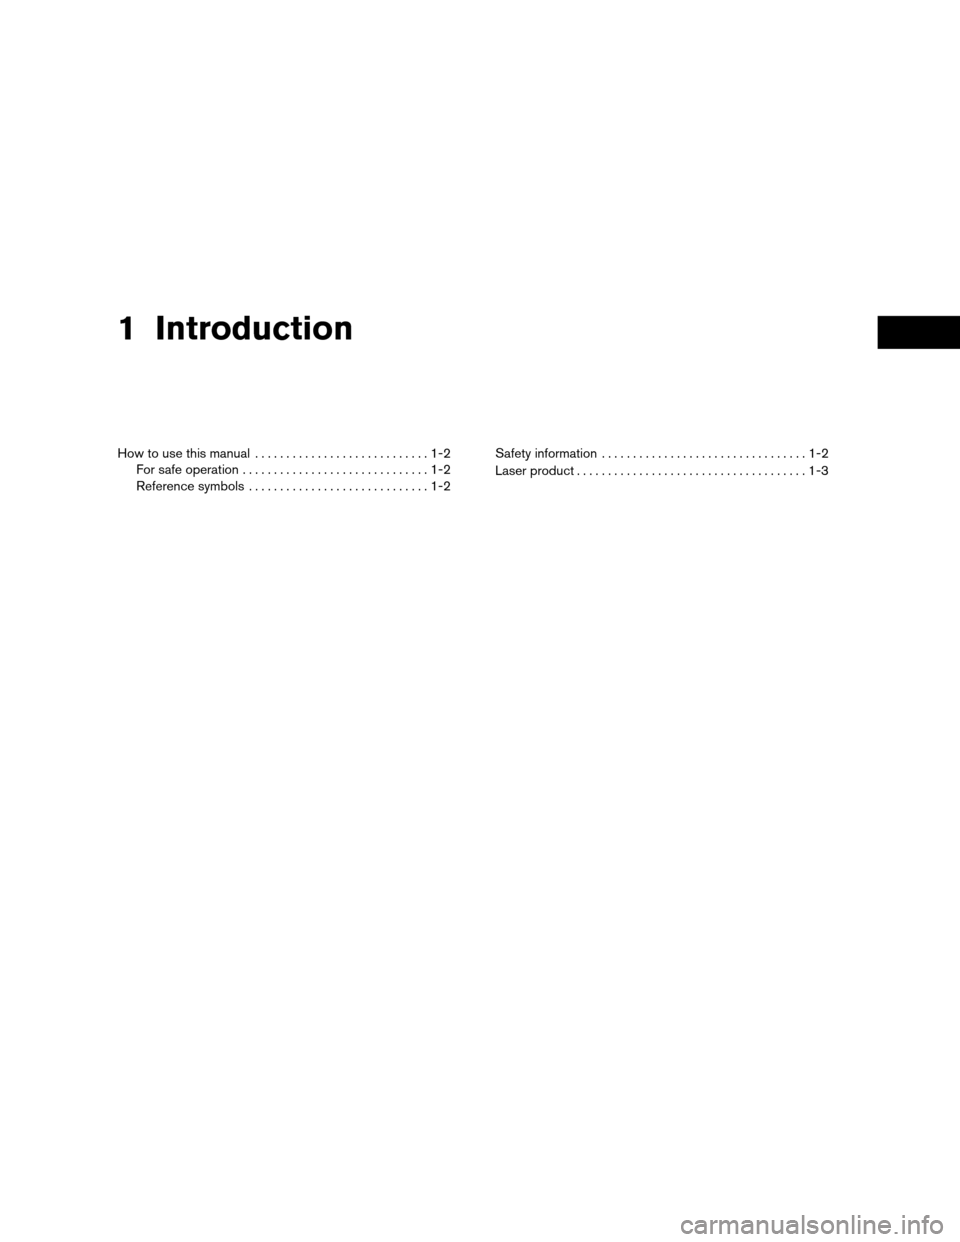 NISSAN ROGUE 2011 1.G LC Navigation Manual 1 Introduction
How to use this manual............................1-2
For safe operation ..............................1-2
Reference symbols .............................1-2 Safety information
........